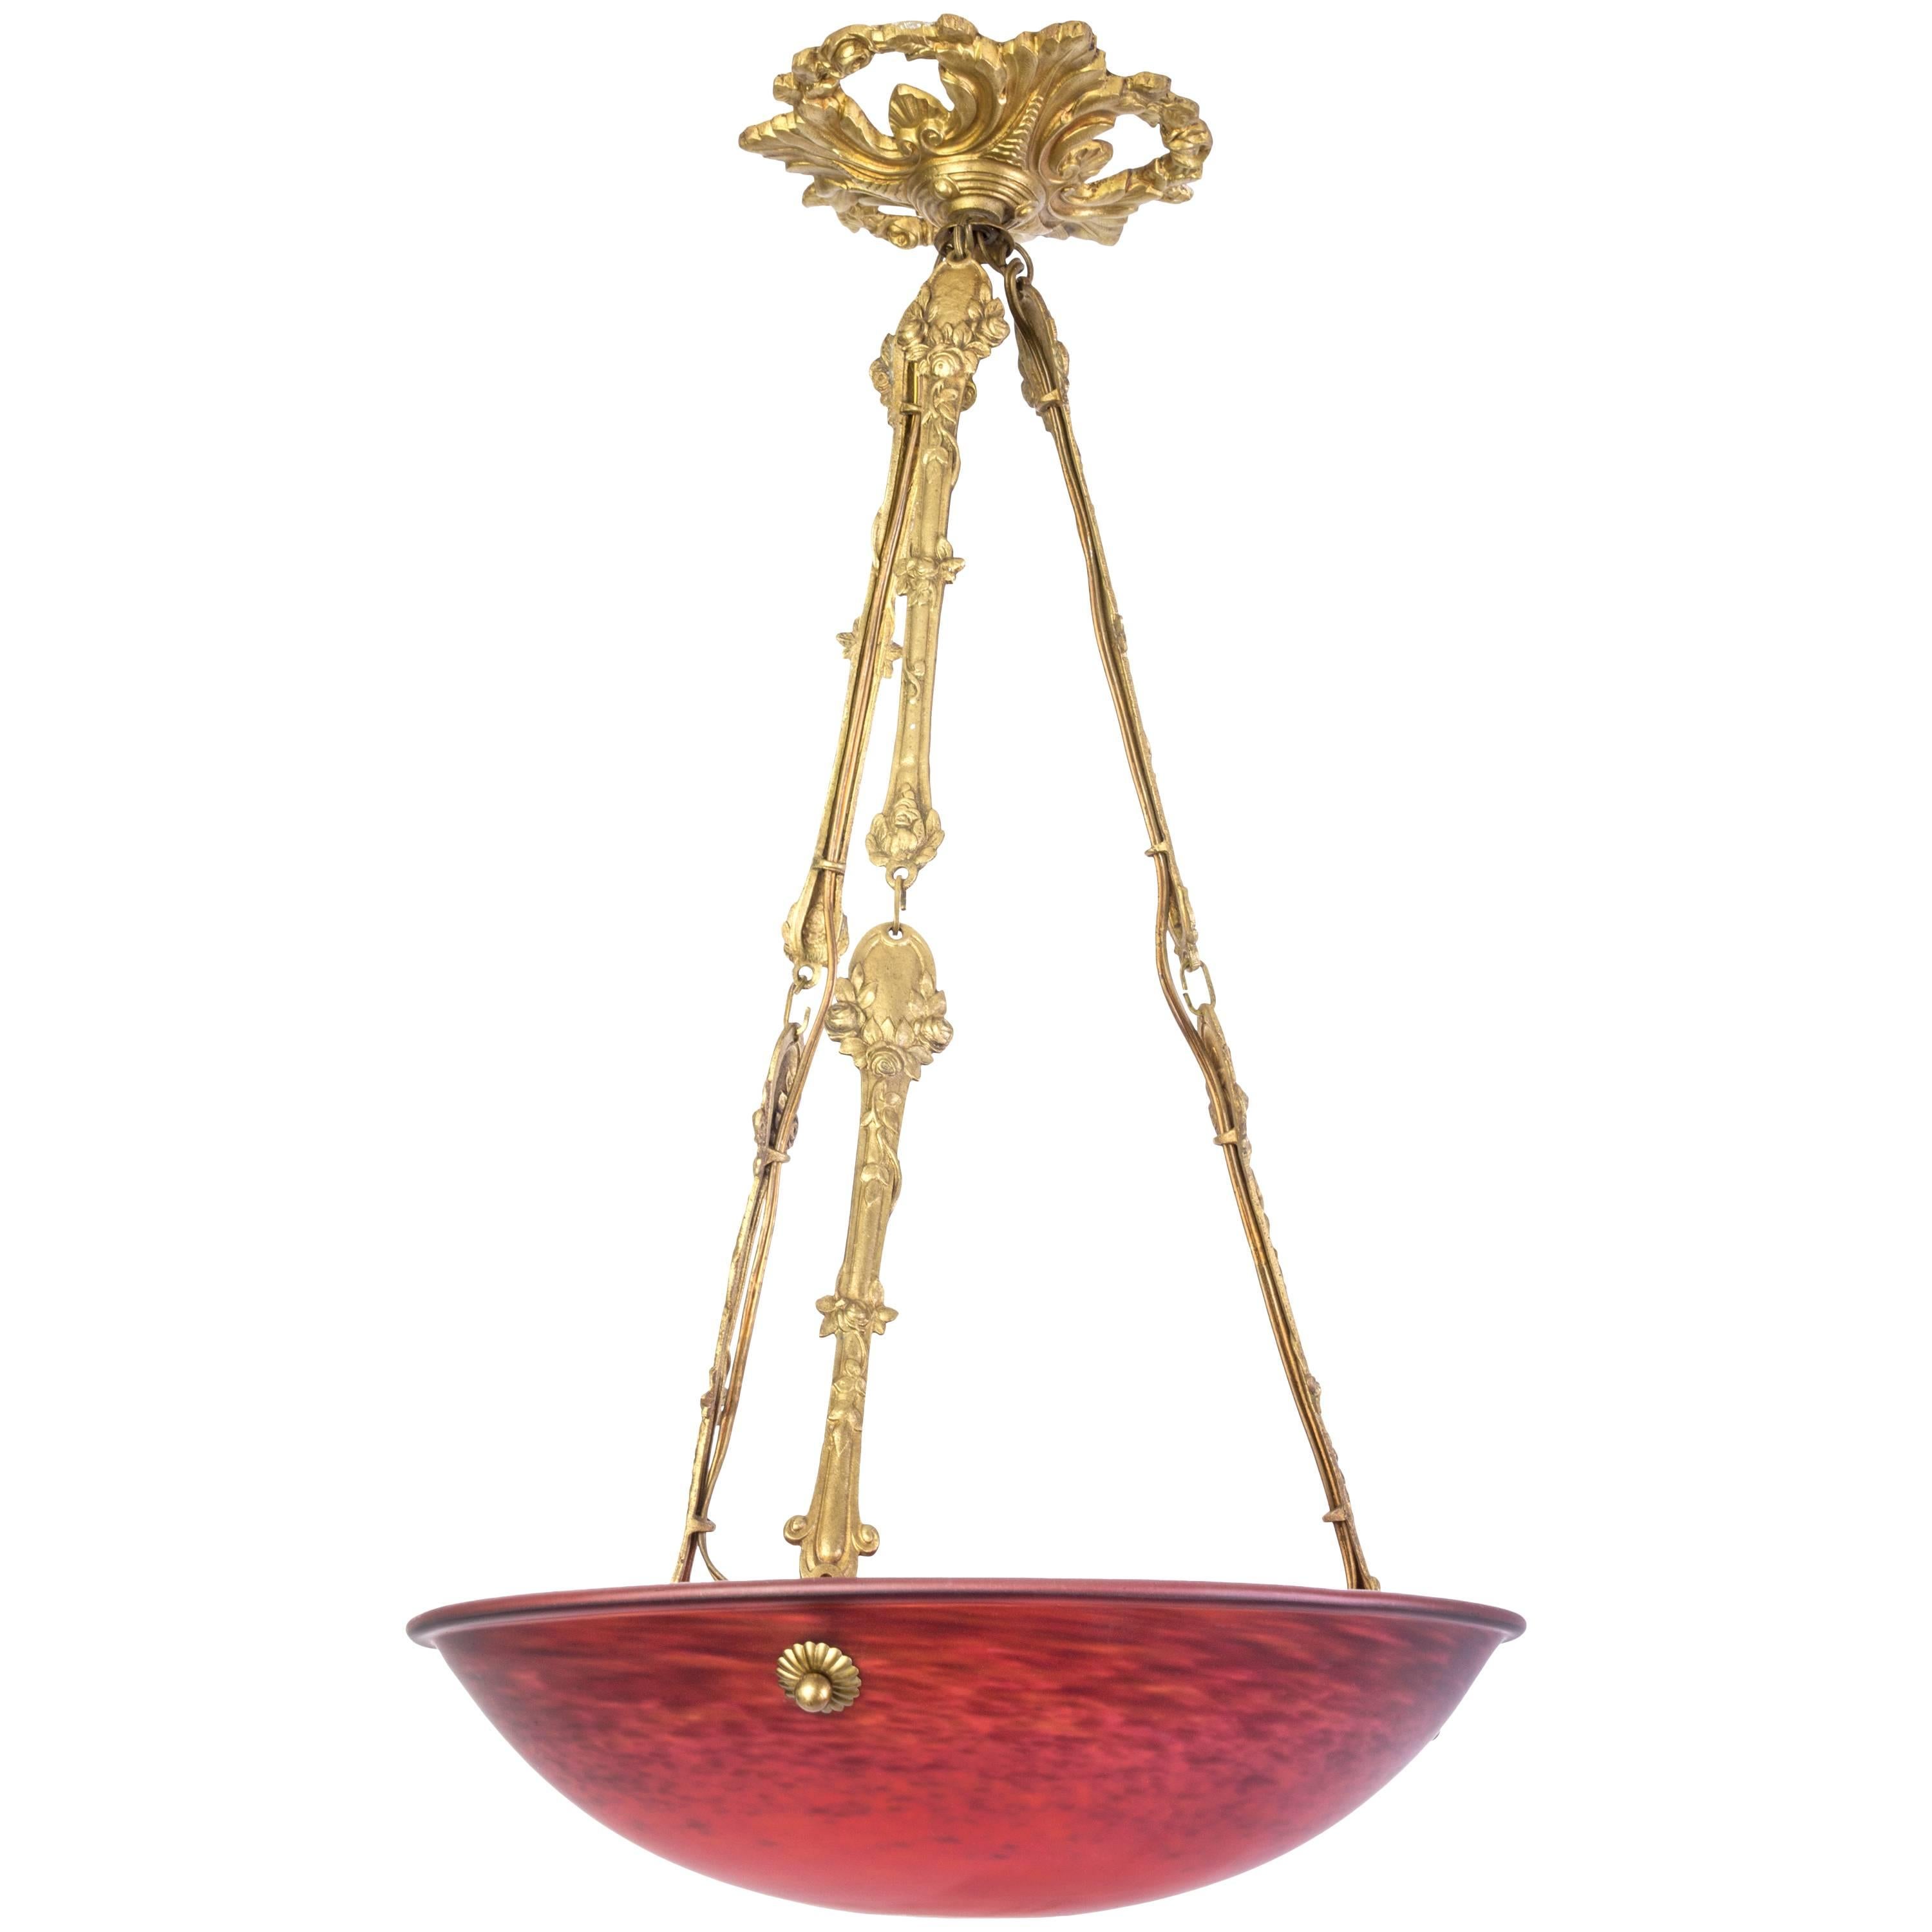 Exceptional 1920s French Art Deco Chandelier For Sale